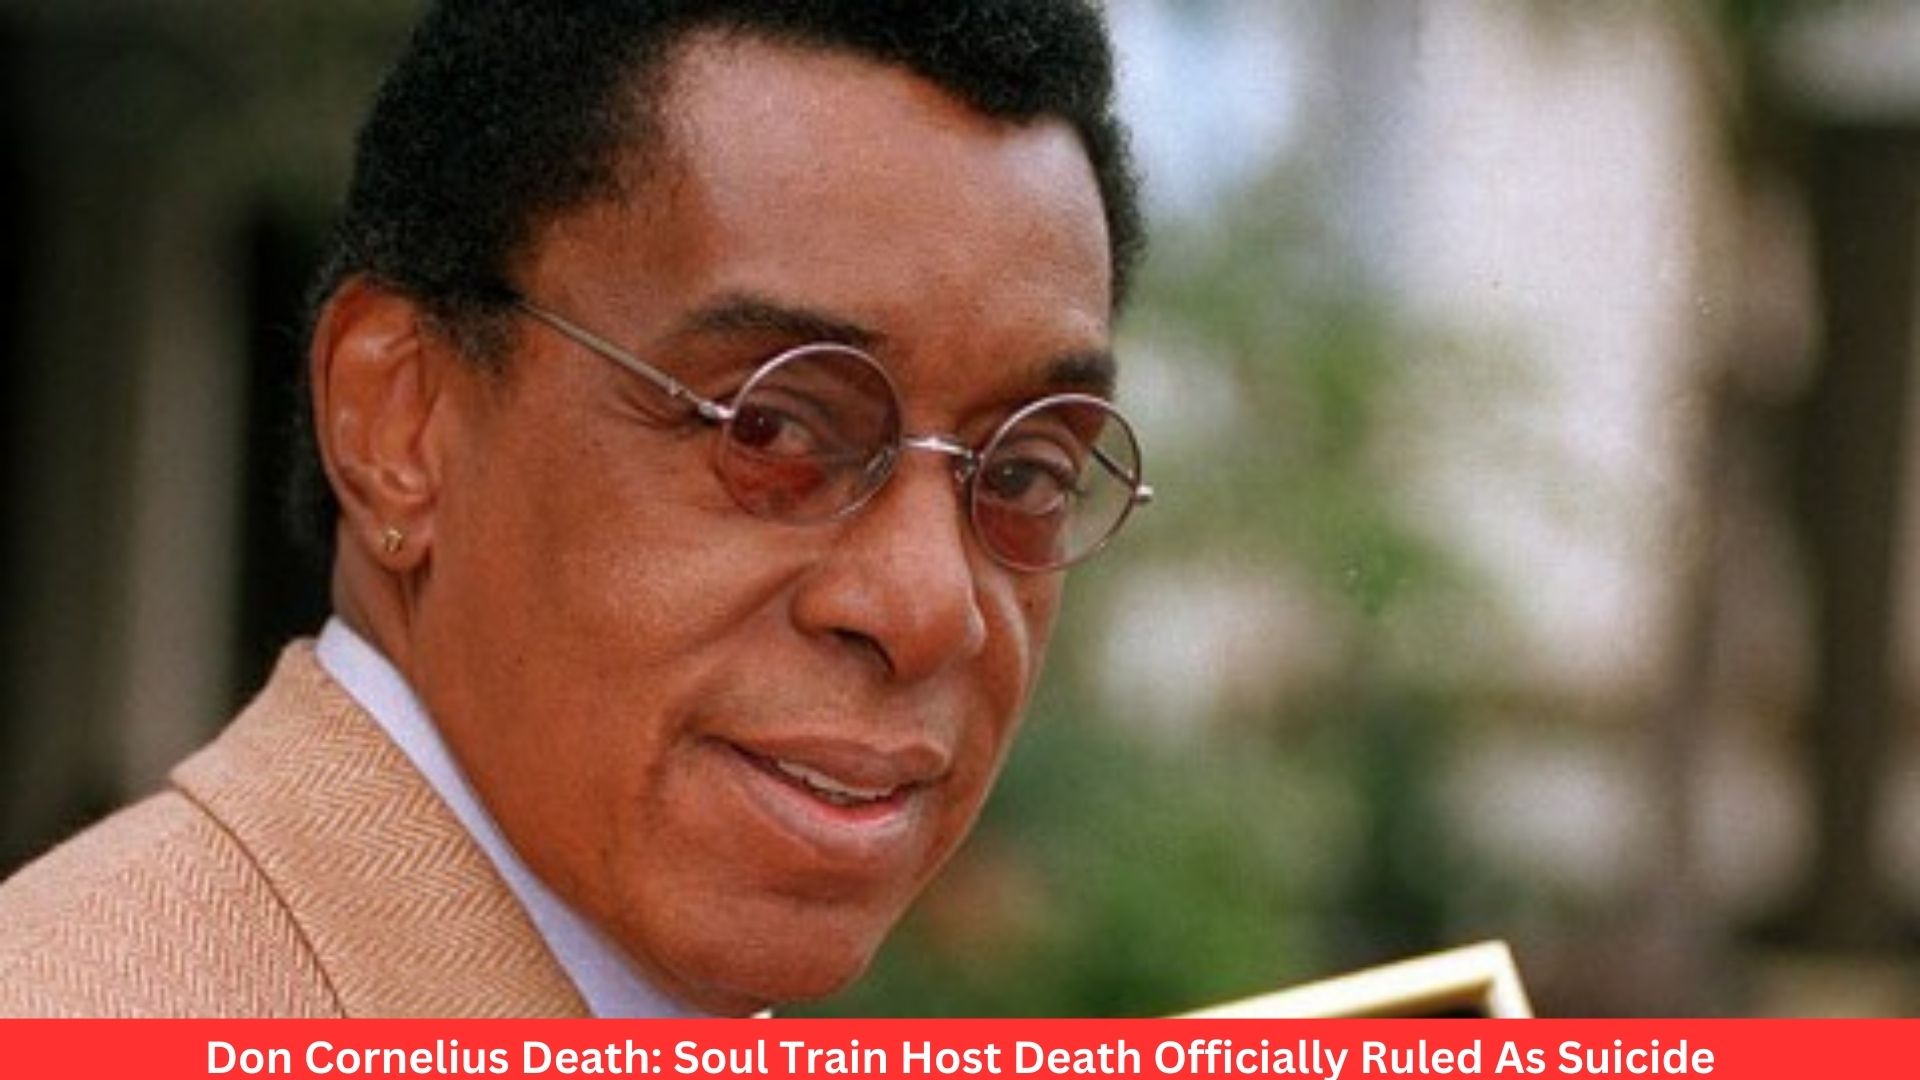 Don Cornelius Death: Soul Train Host Death Officially Ruled As Suicide